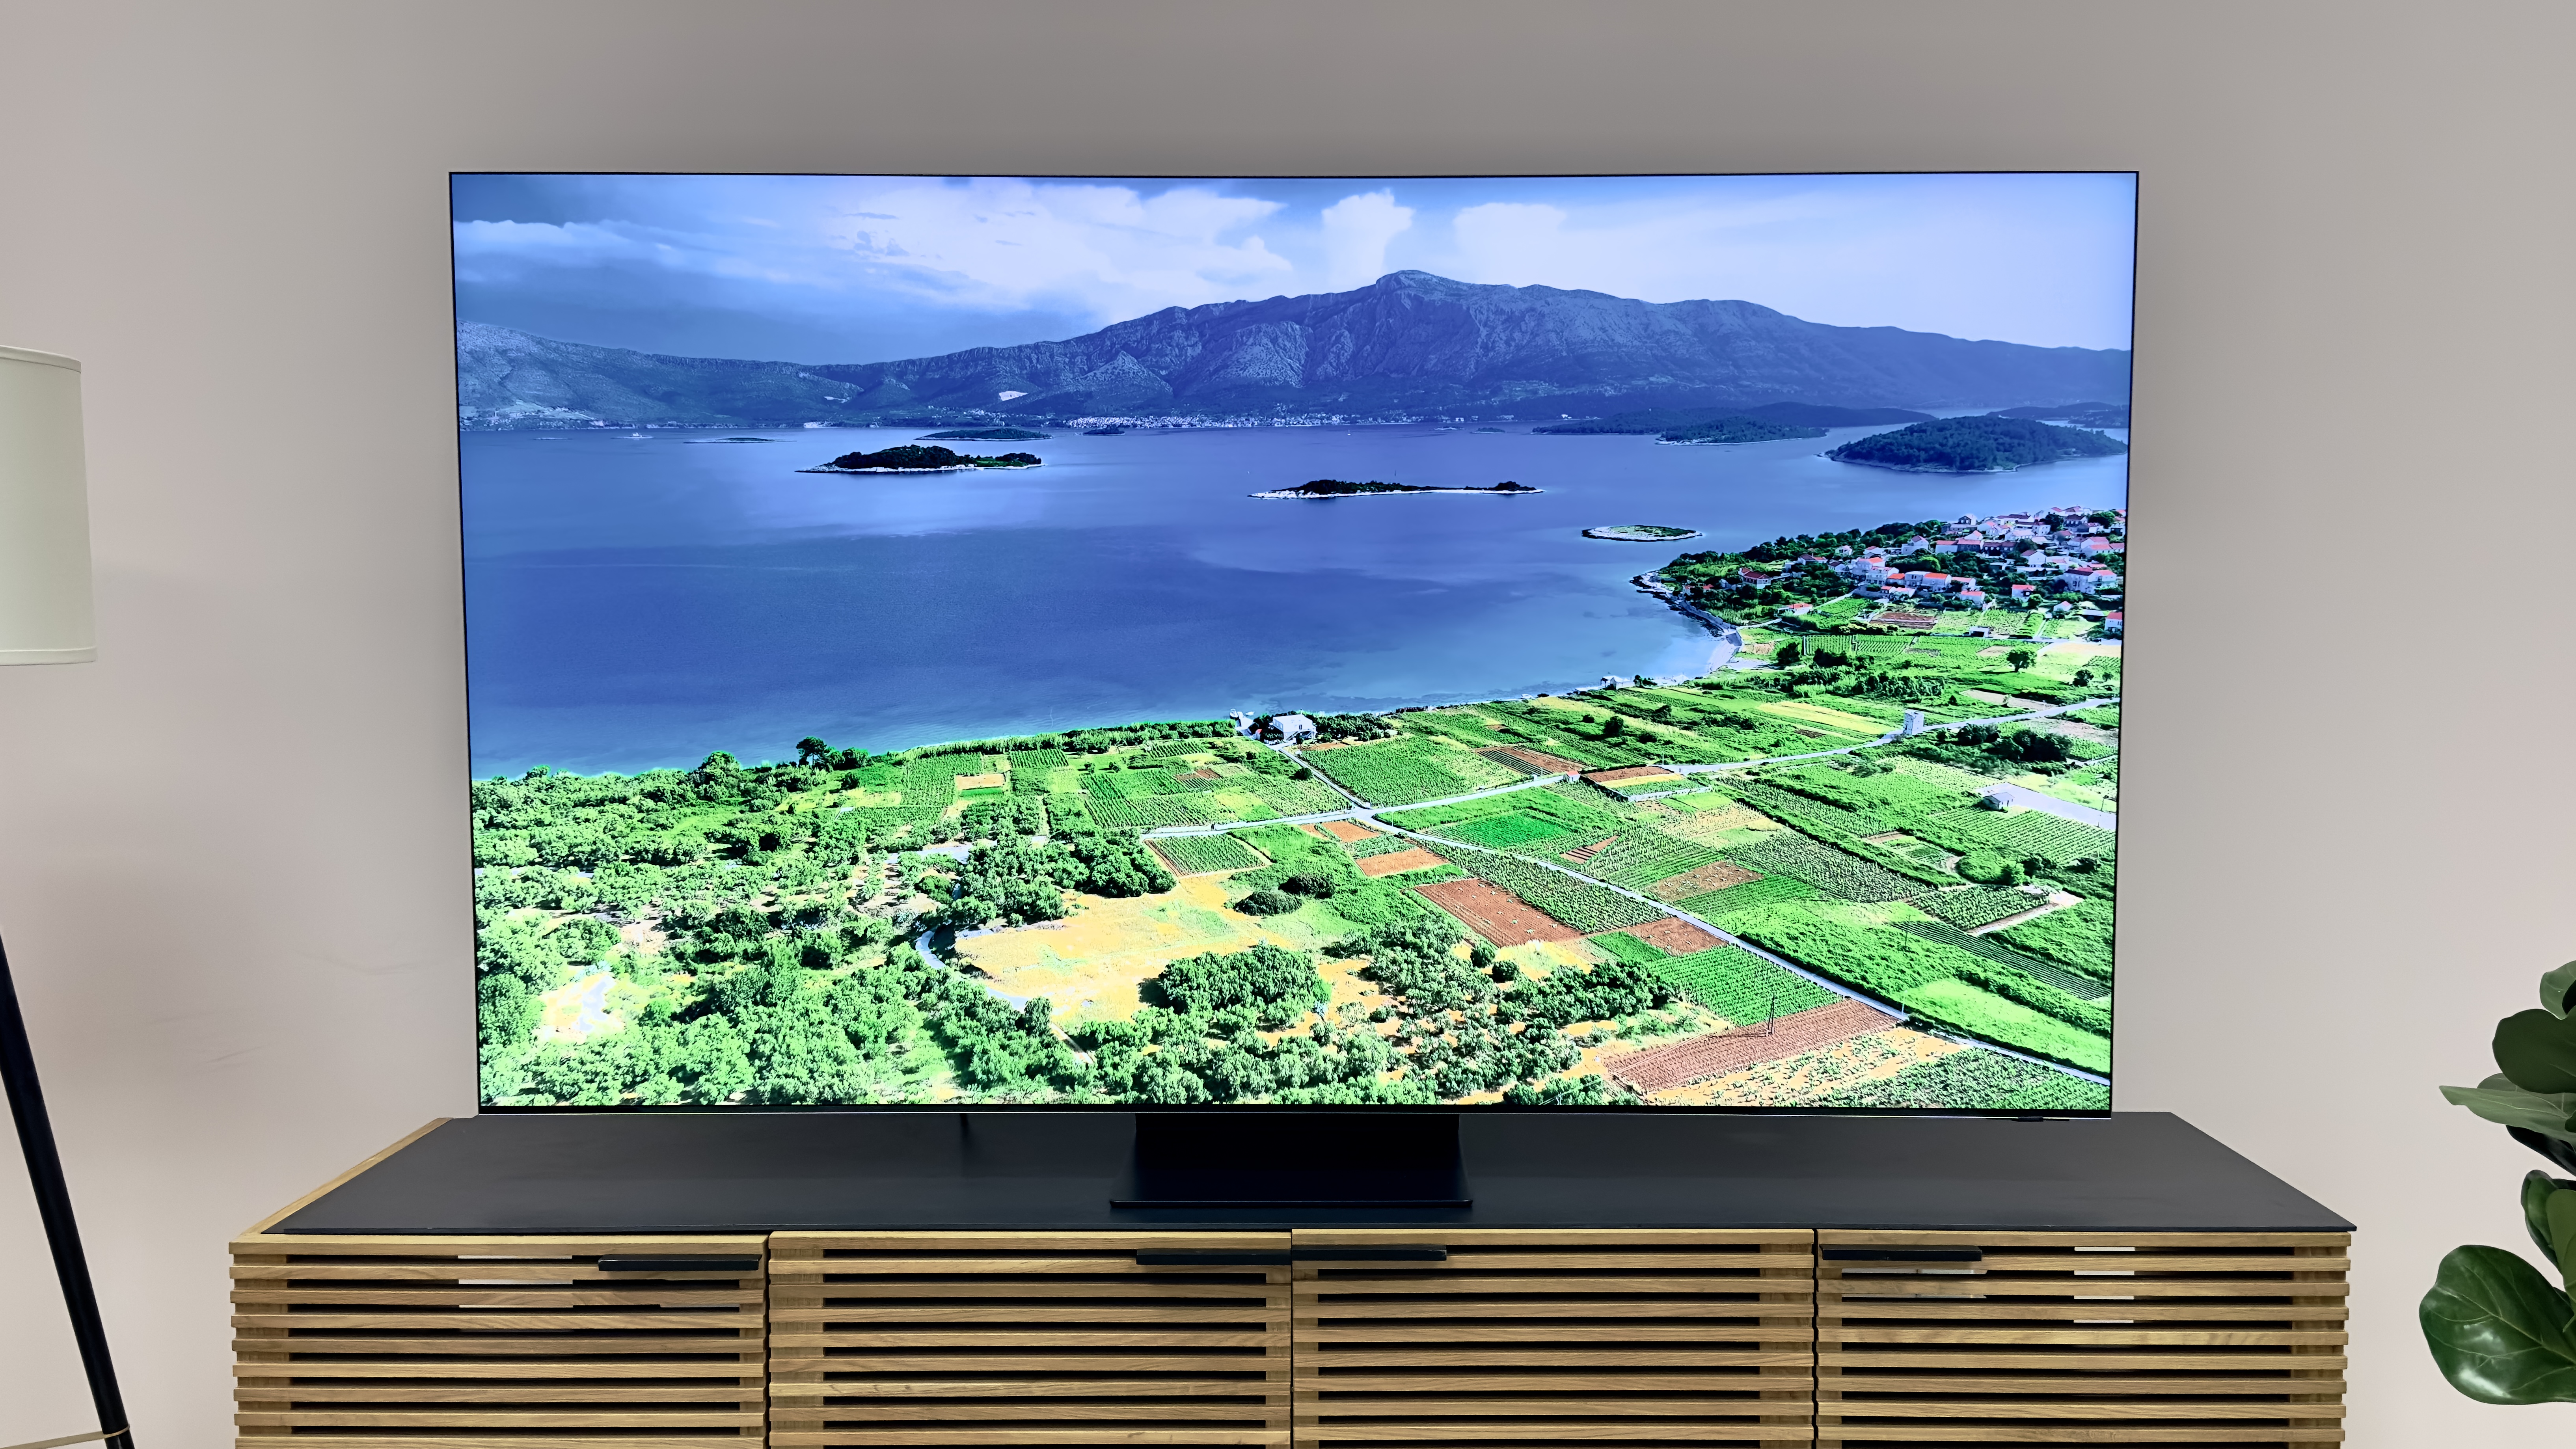 Samsung QN900C Neo QLED 8K TV review: The brightness bar has been raised